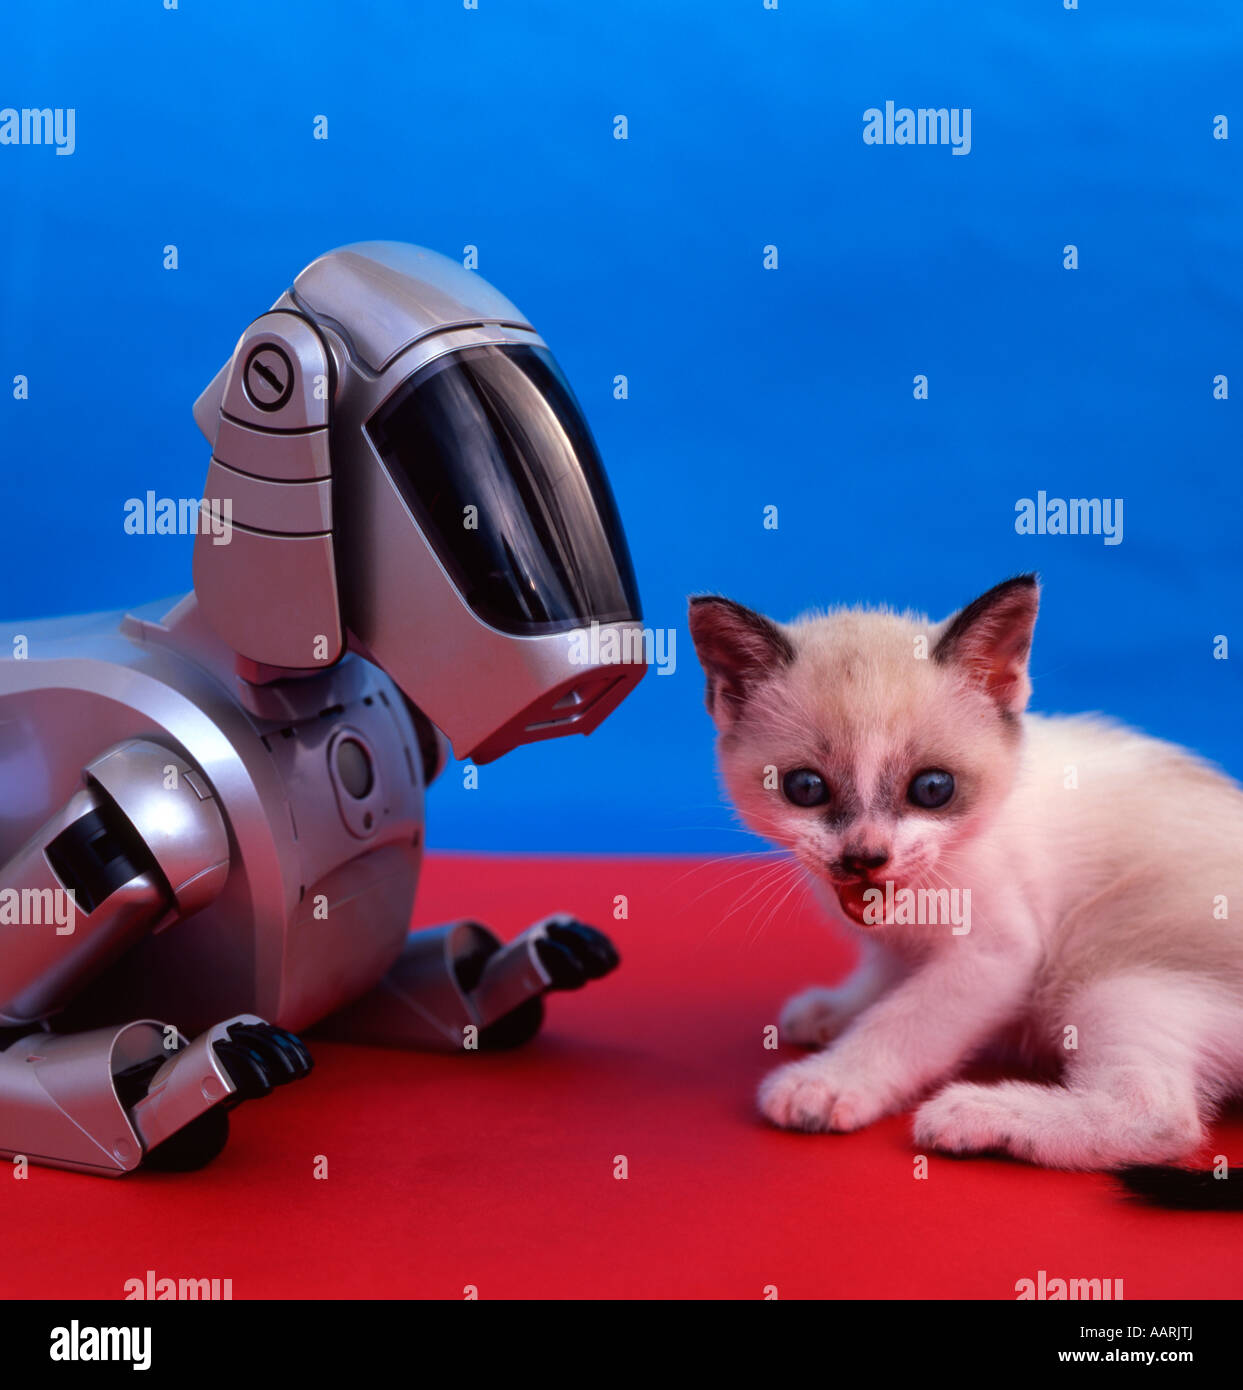 Sony AIBO ( Artificial Intelligence roBOt ) autonomous robot, First generation model ( ERS-110 ERS-111 ) with kitten Stock Photo